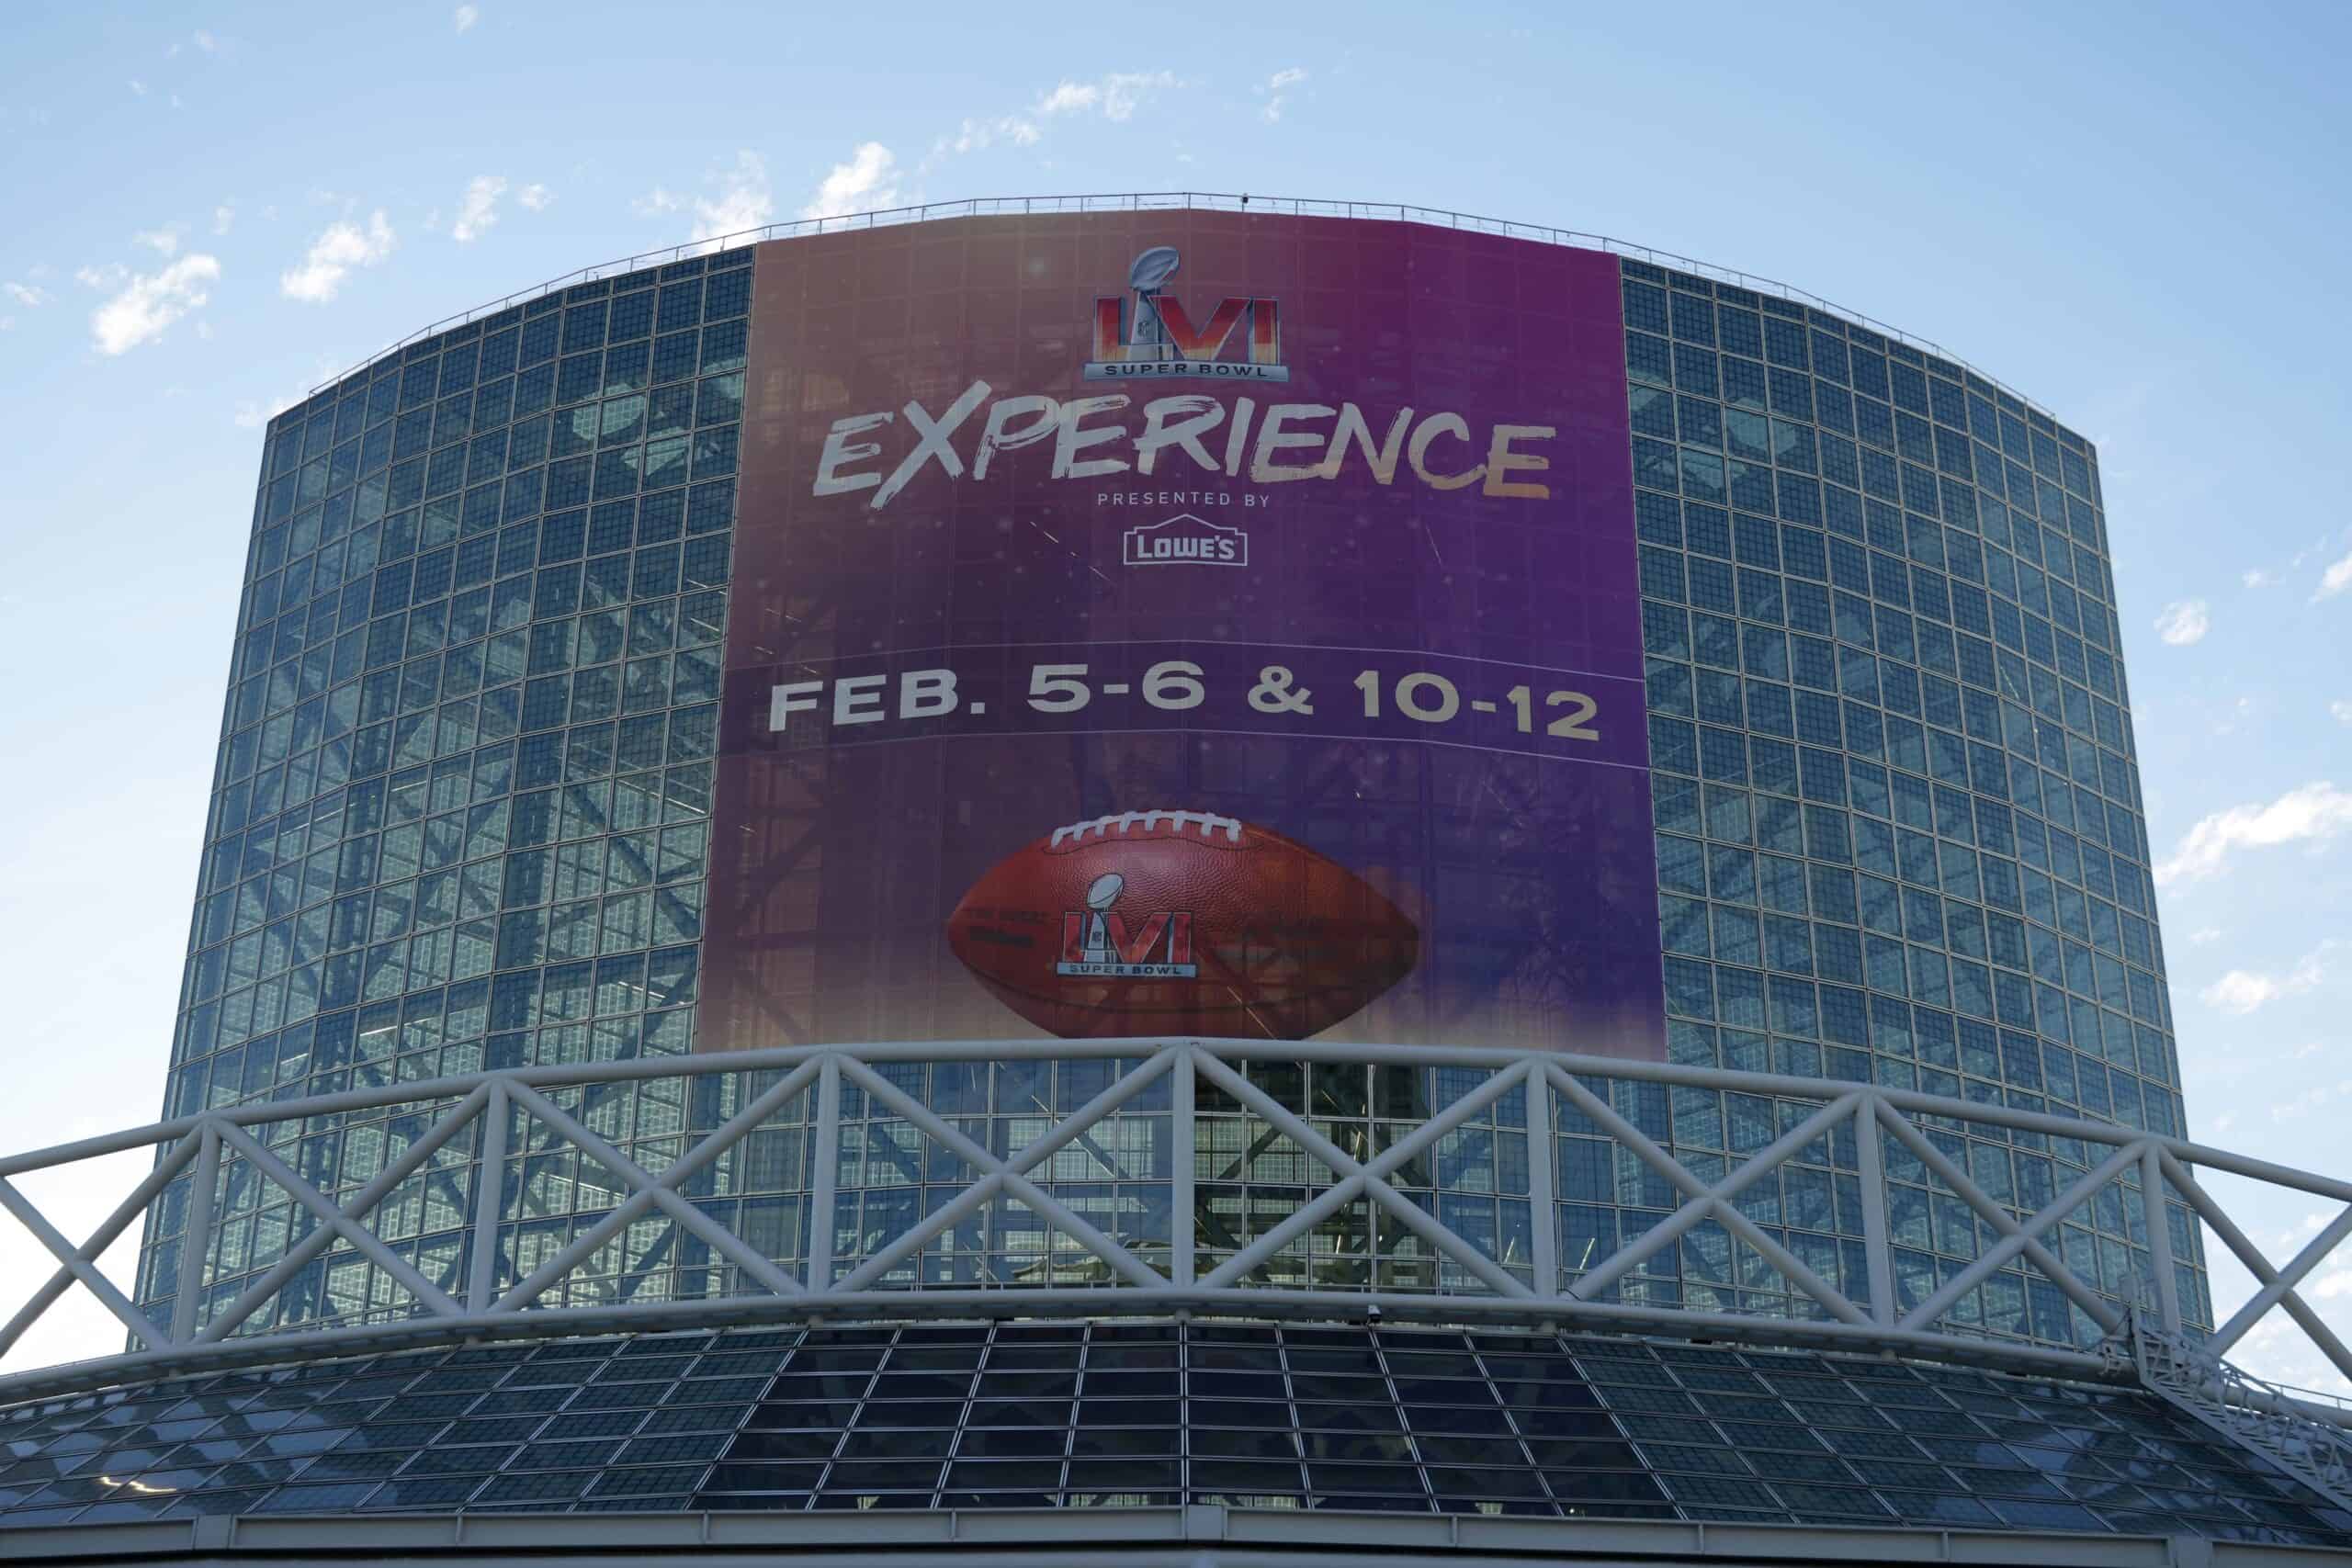 Super Bowl Experience 2022: Location, dates, attractions, cost, and more